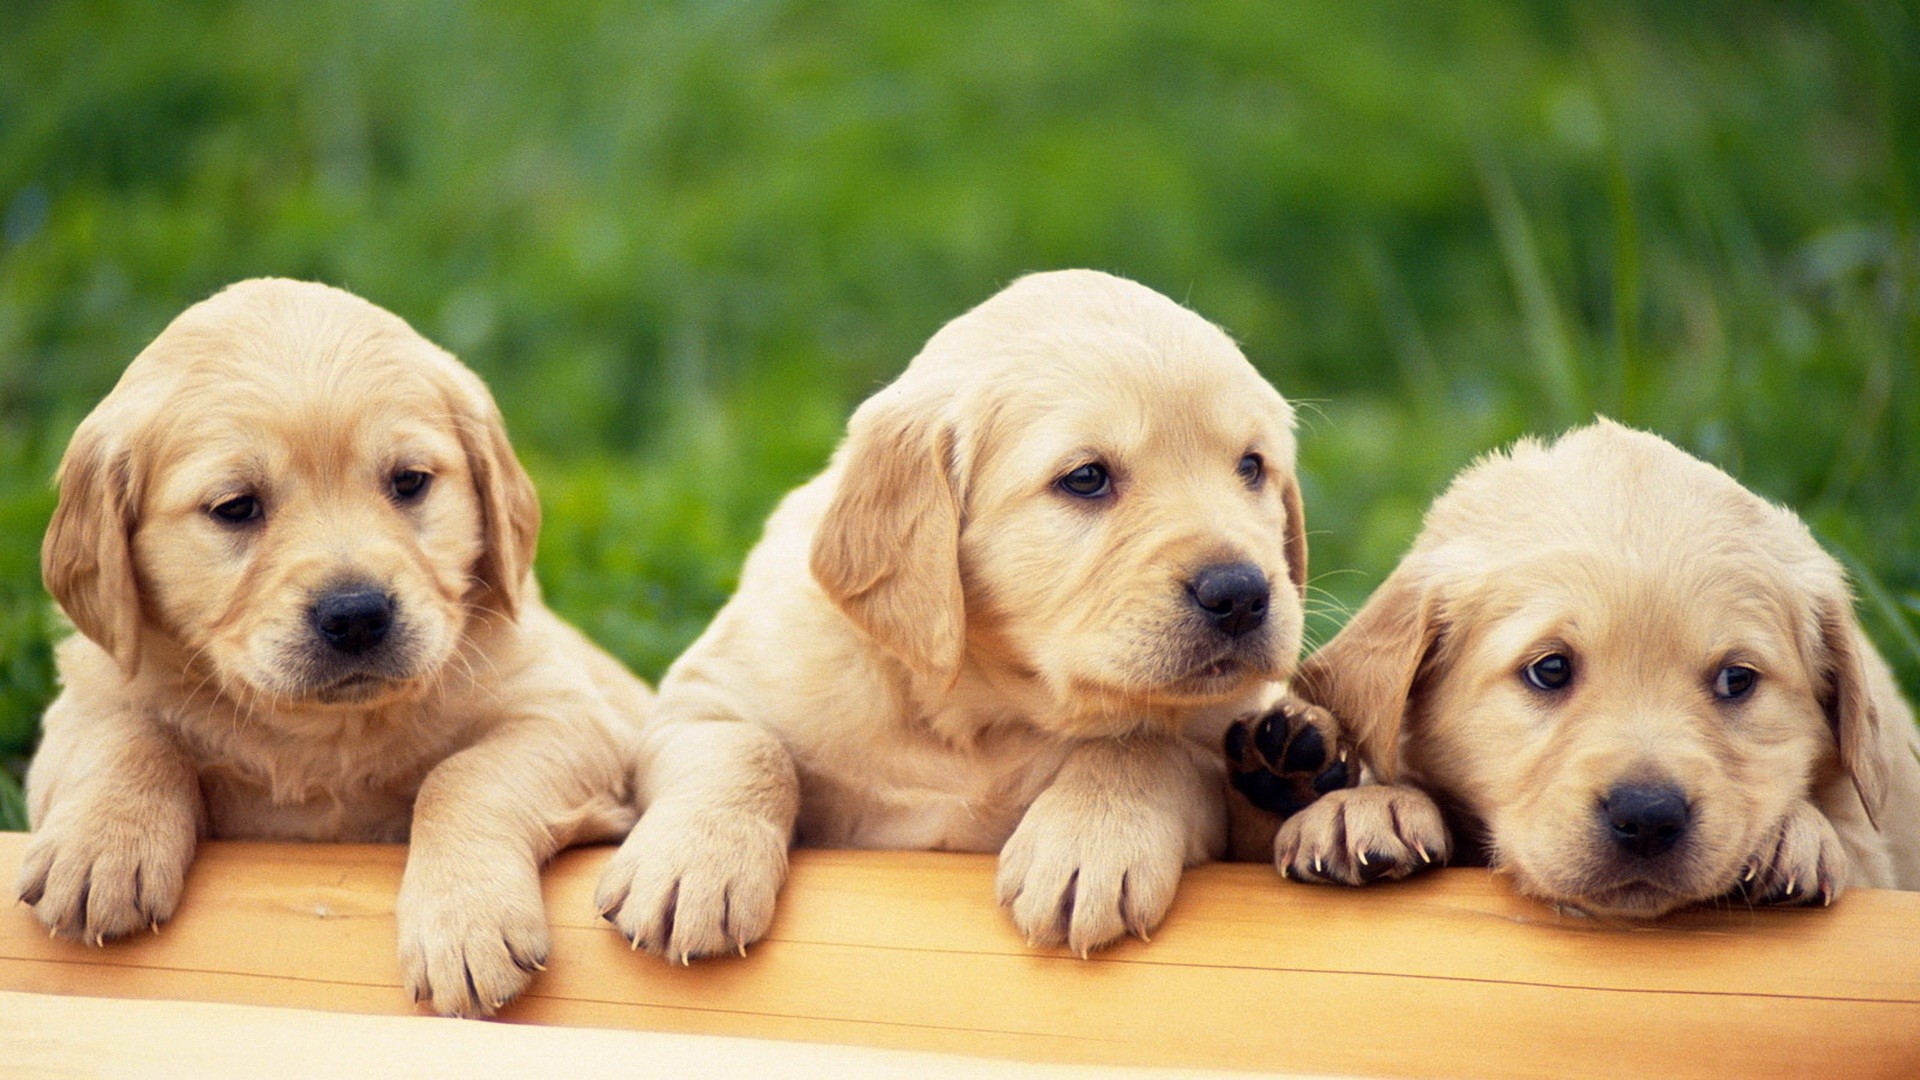 Cute Puppy Wallpapers for Desktop (58+ images)